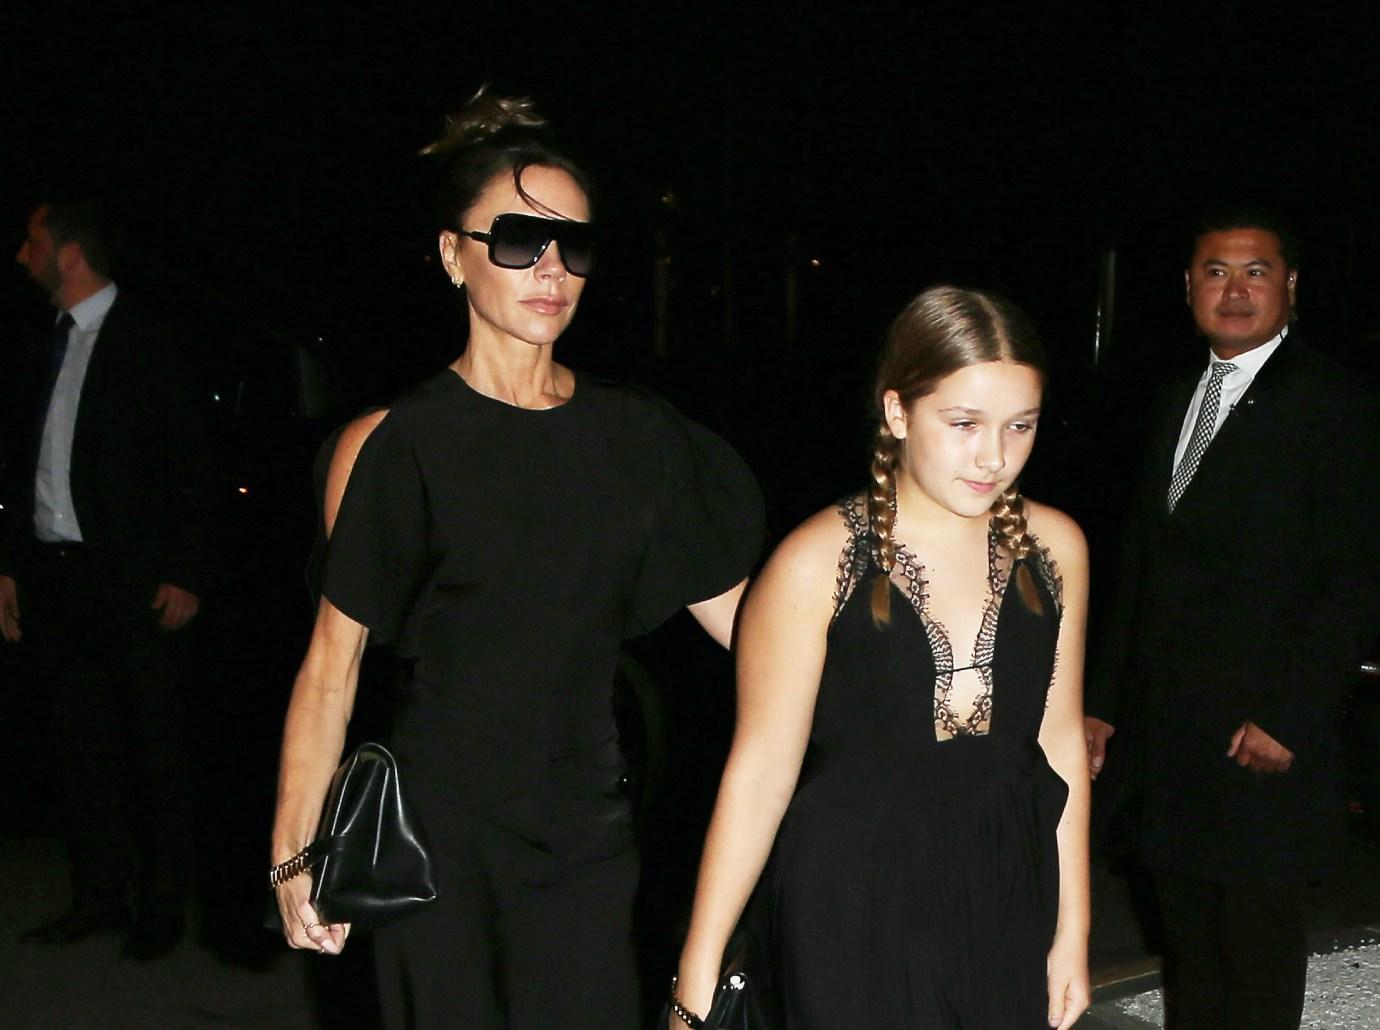 Victoria Beckham Regrets Getting Implants When She Was Younger